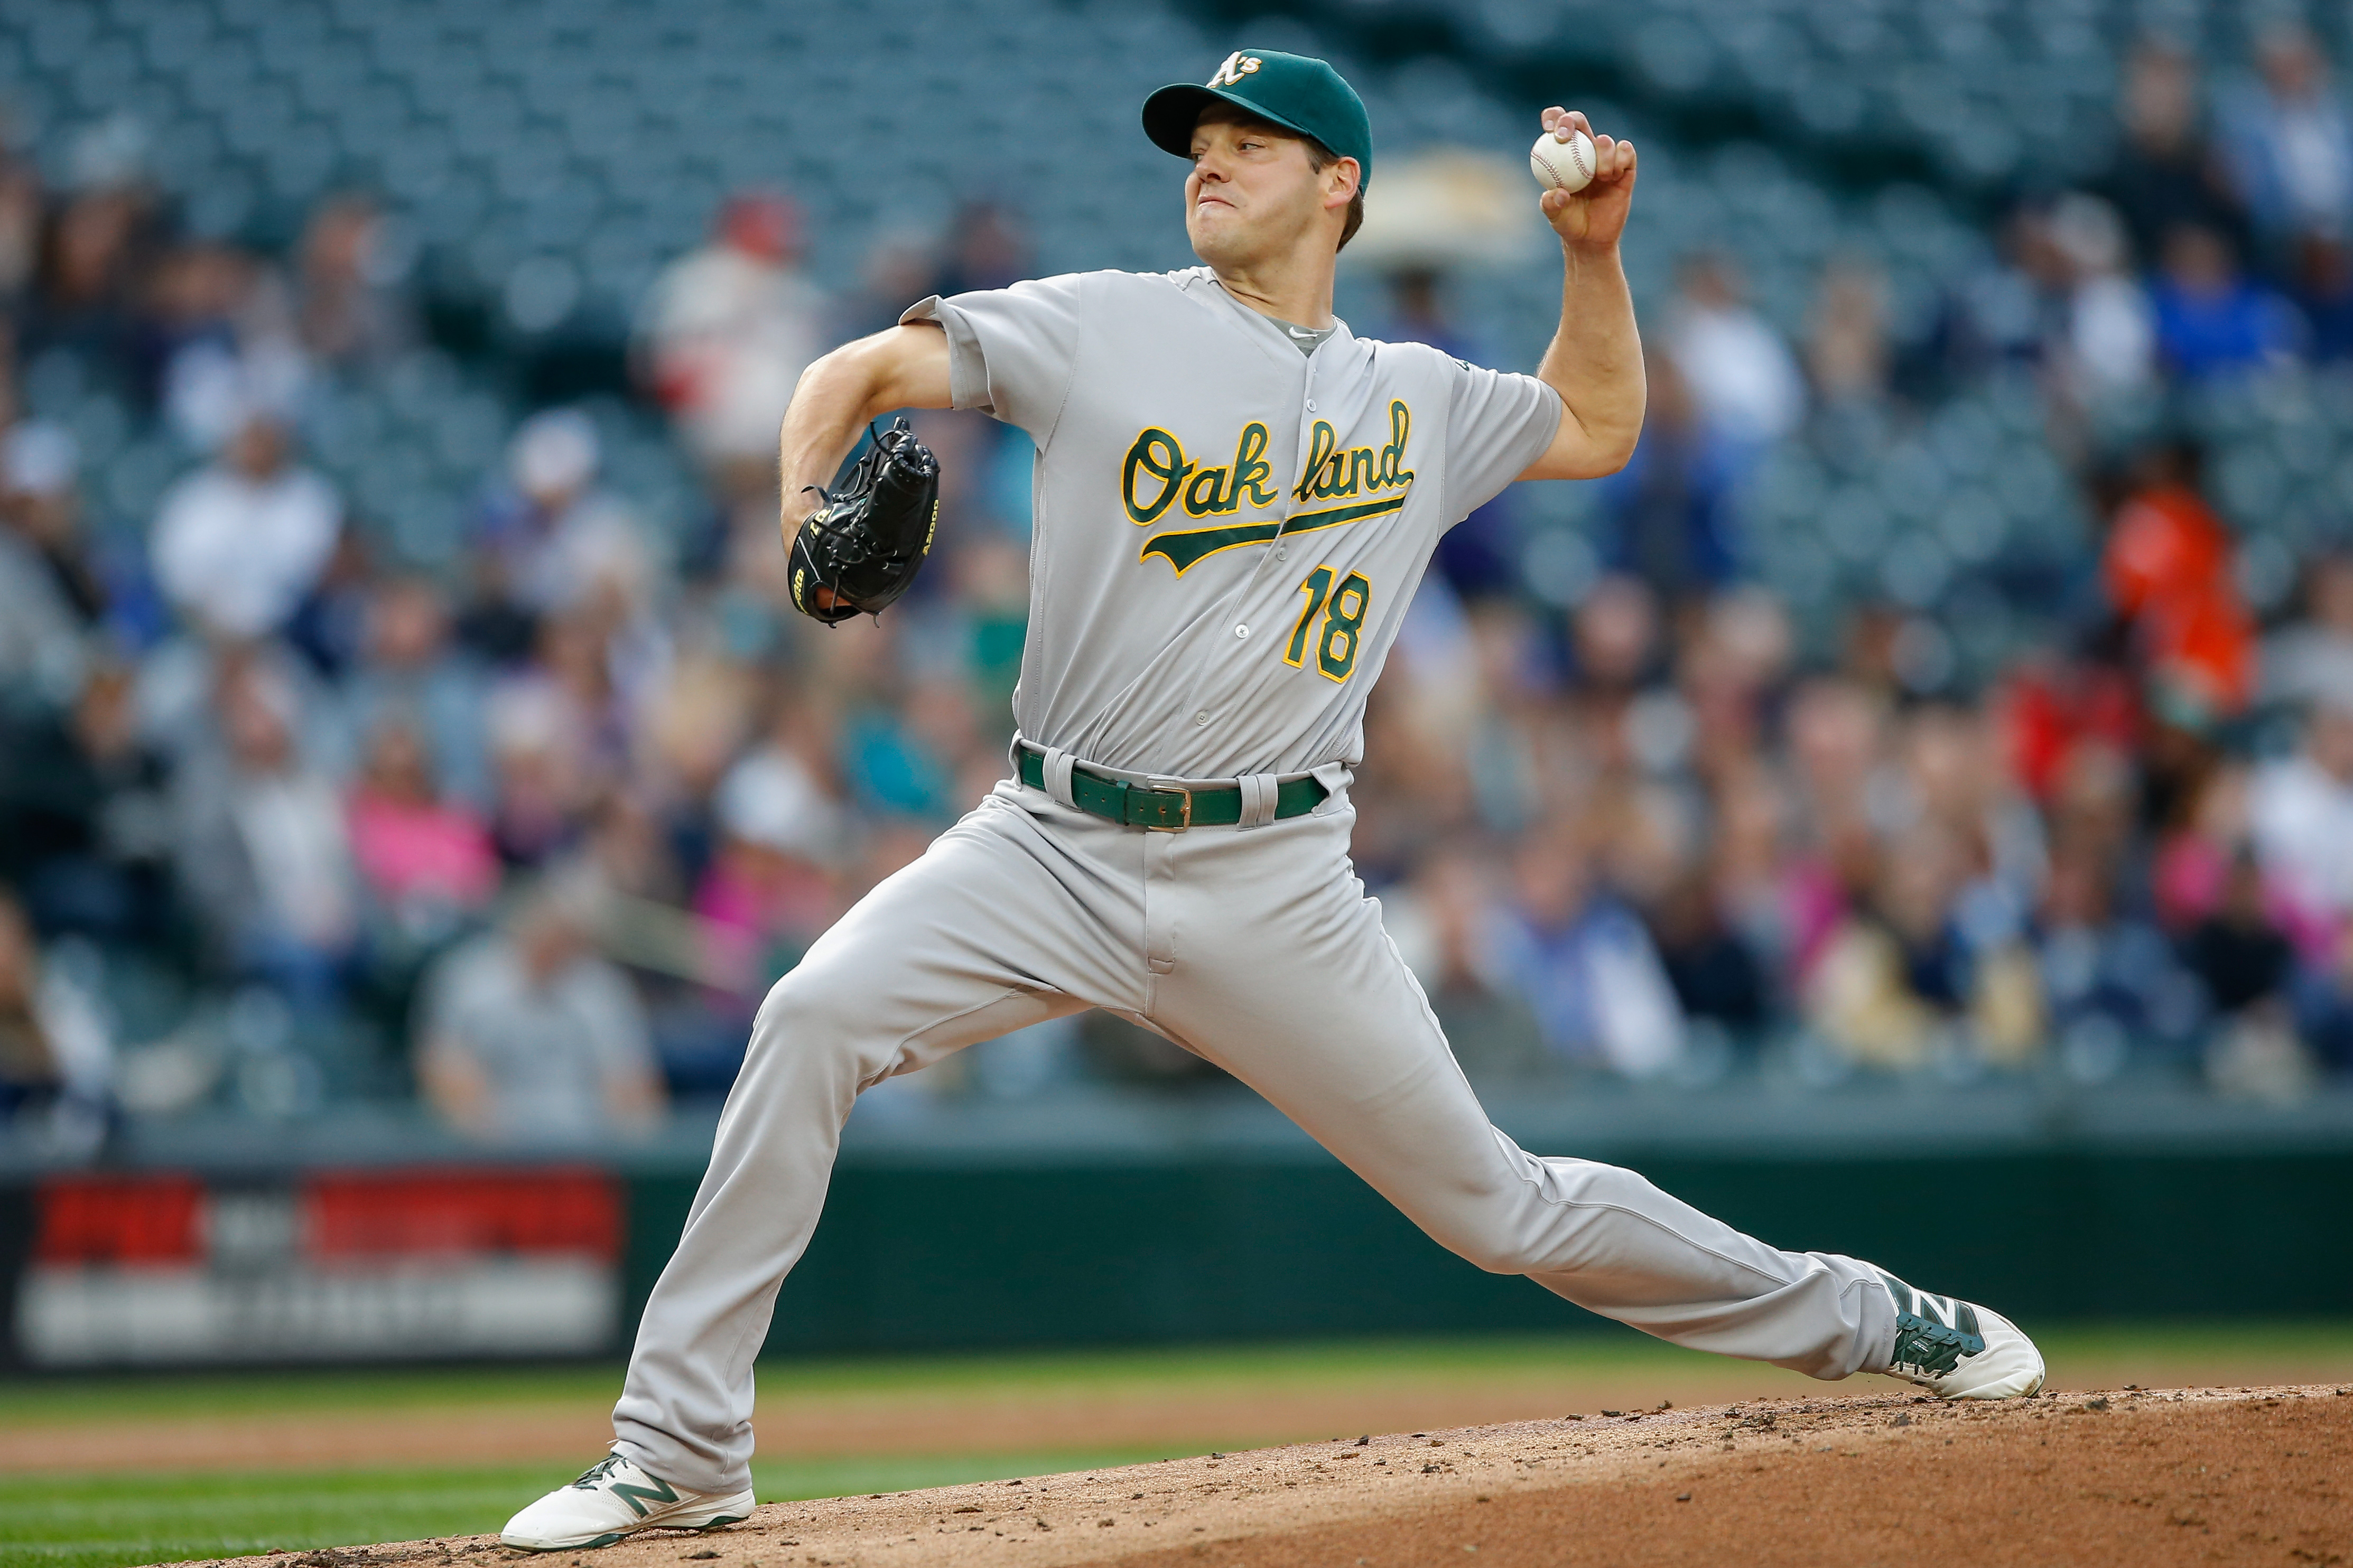 SEATTLE, WA - MAY 23:  Starting pitcher Rich Hill #18 of the Oakland Athletics pitches against the Seattle Mariners in the first inning at Safeco Field on May 23, 2016 in Seattle, Washington.  (Photo by Otto Greule Jr/Getty Images)